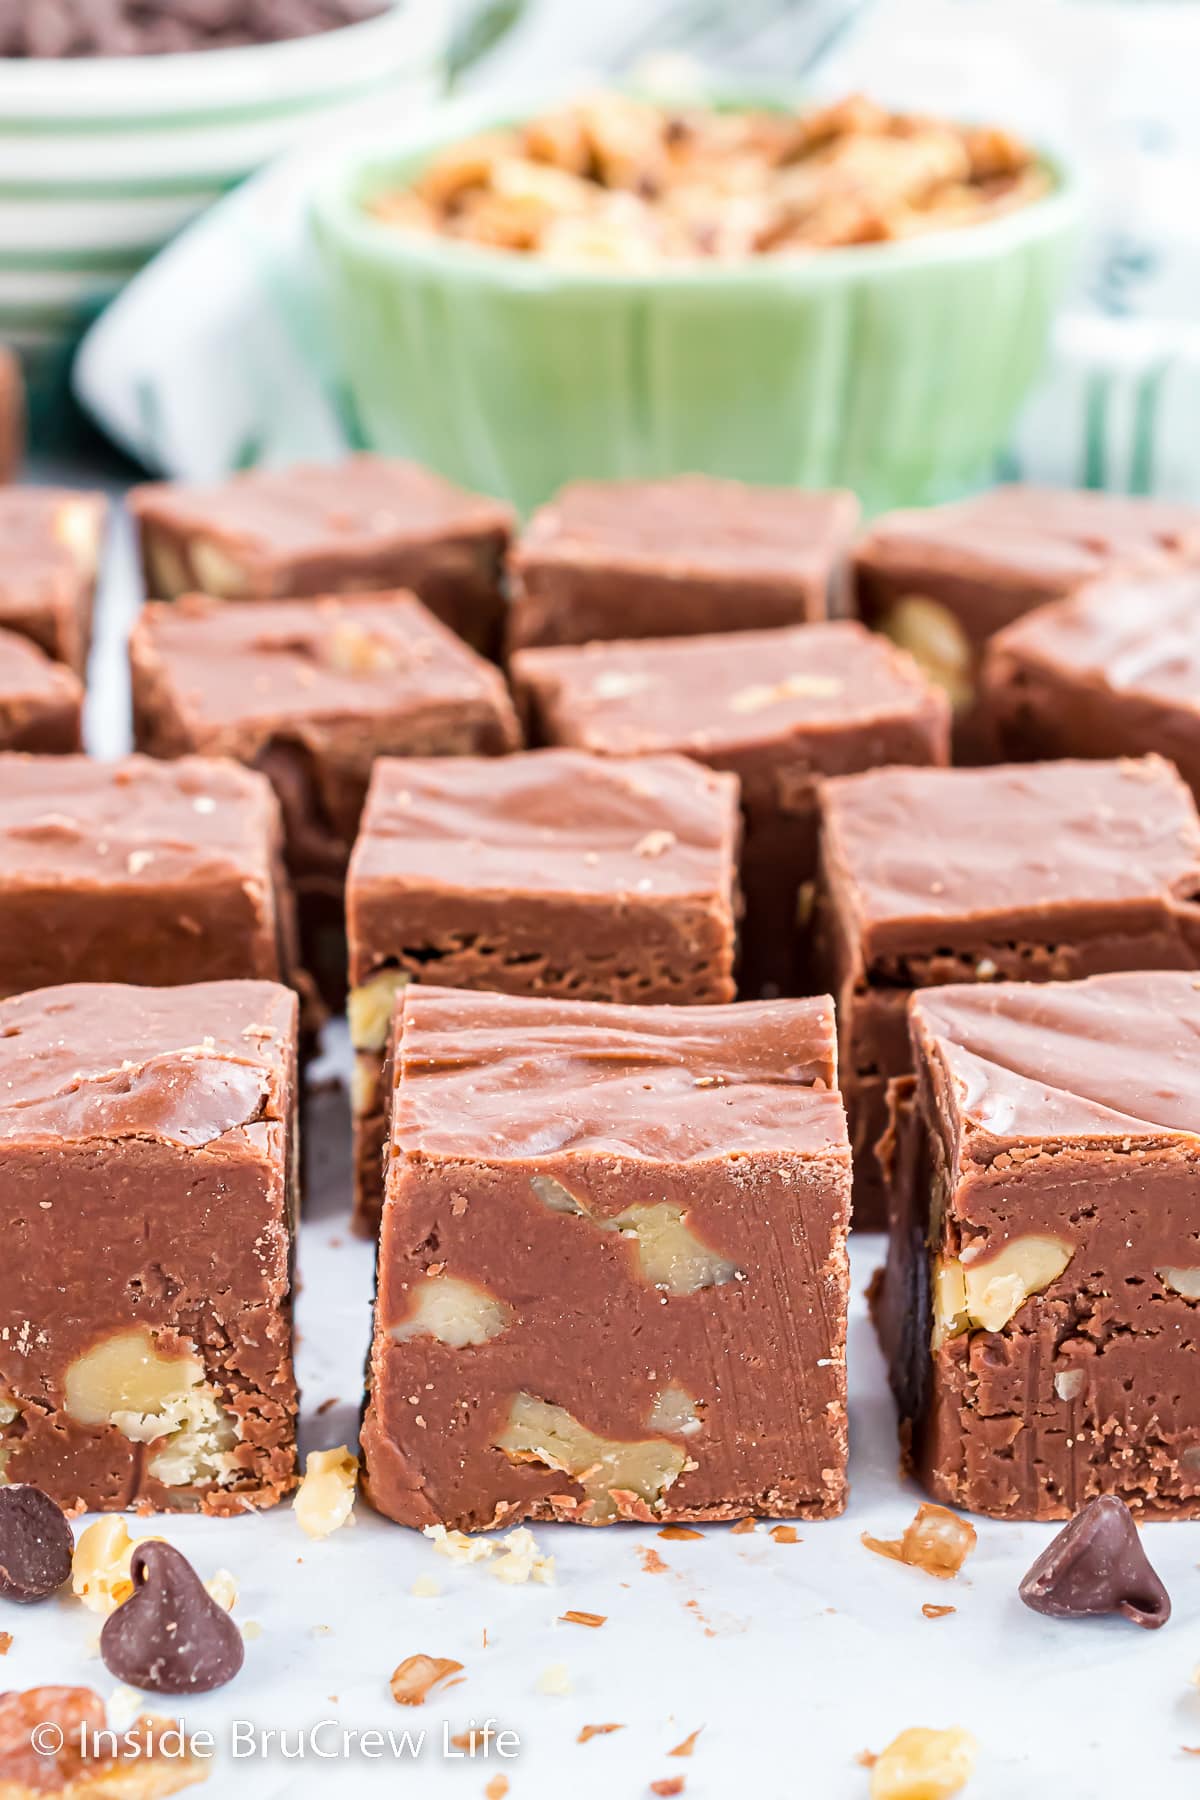 Squares of chocolate fudge with walnuts lined up on a white table.